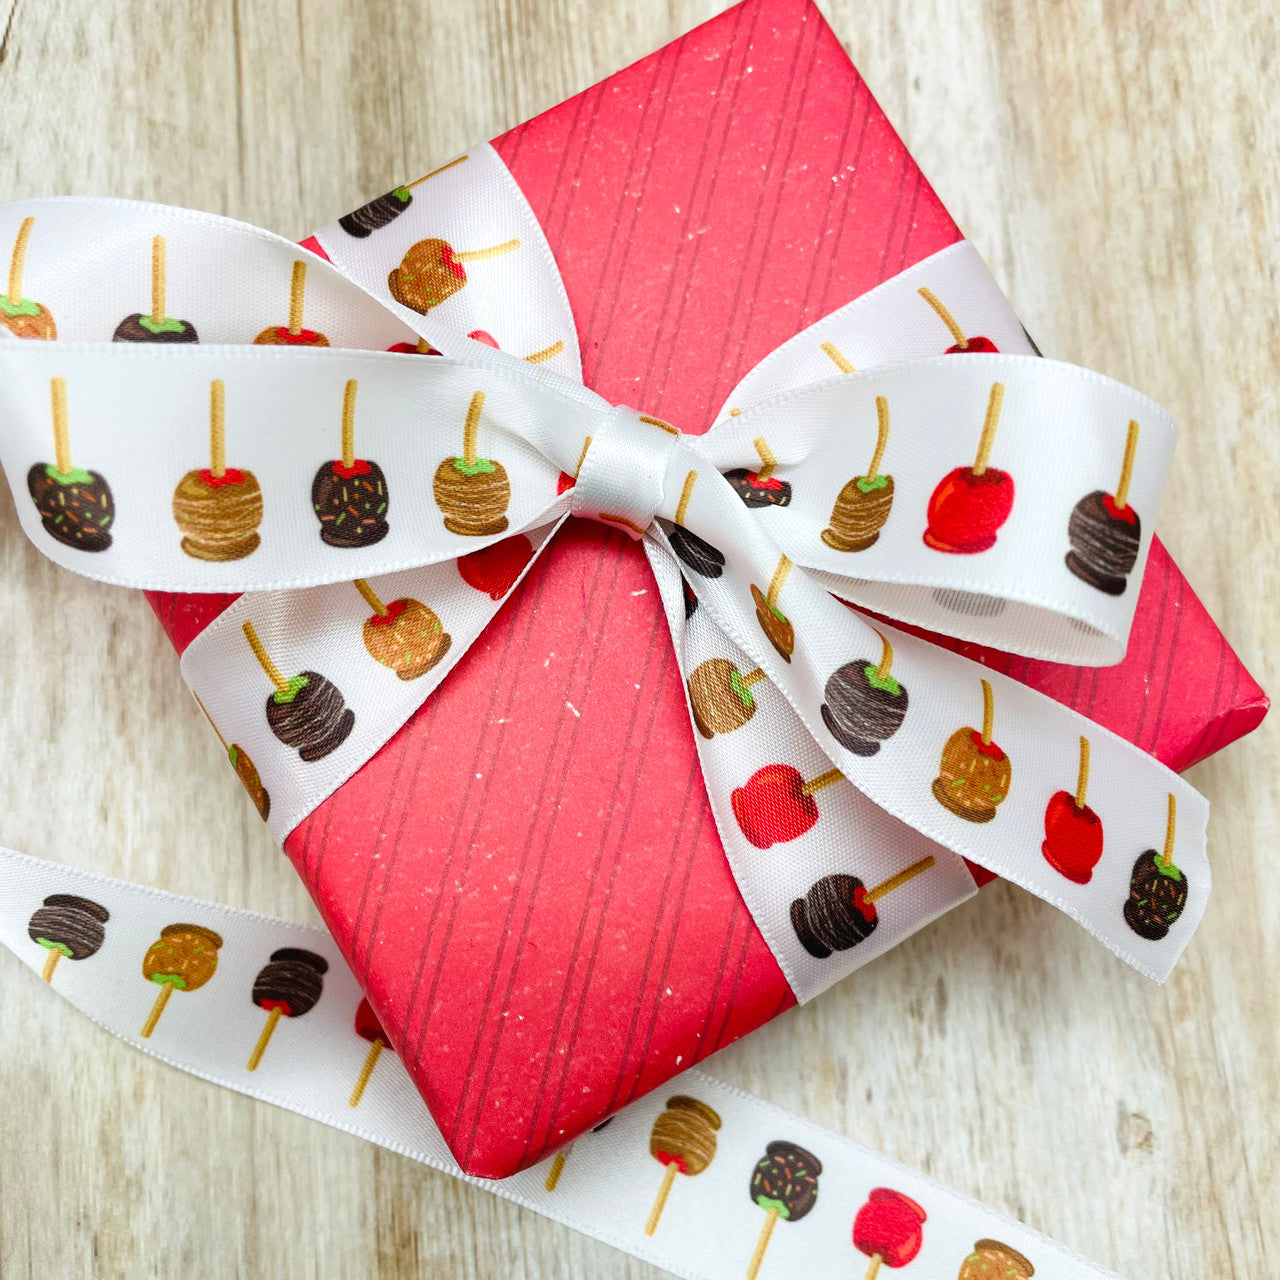 Tie a pretty Fall gift with our candy apple ribbon for a spark of fun!